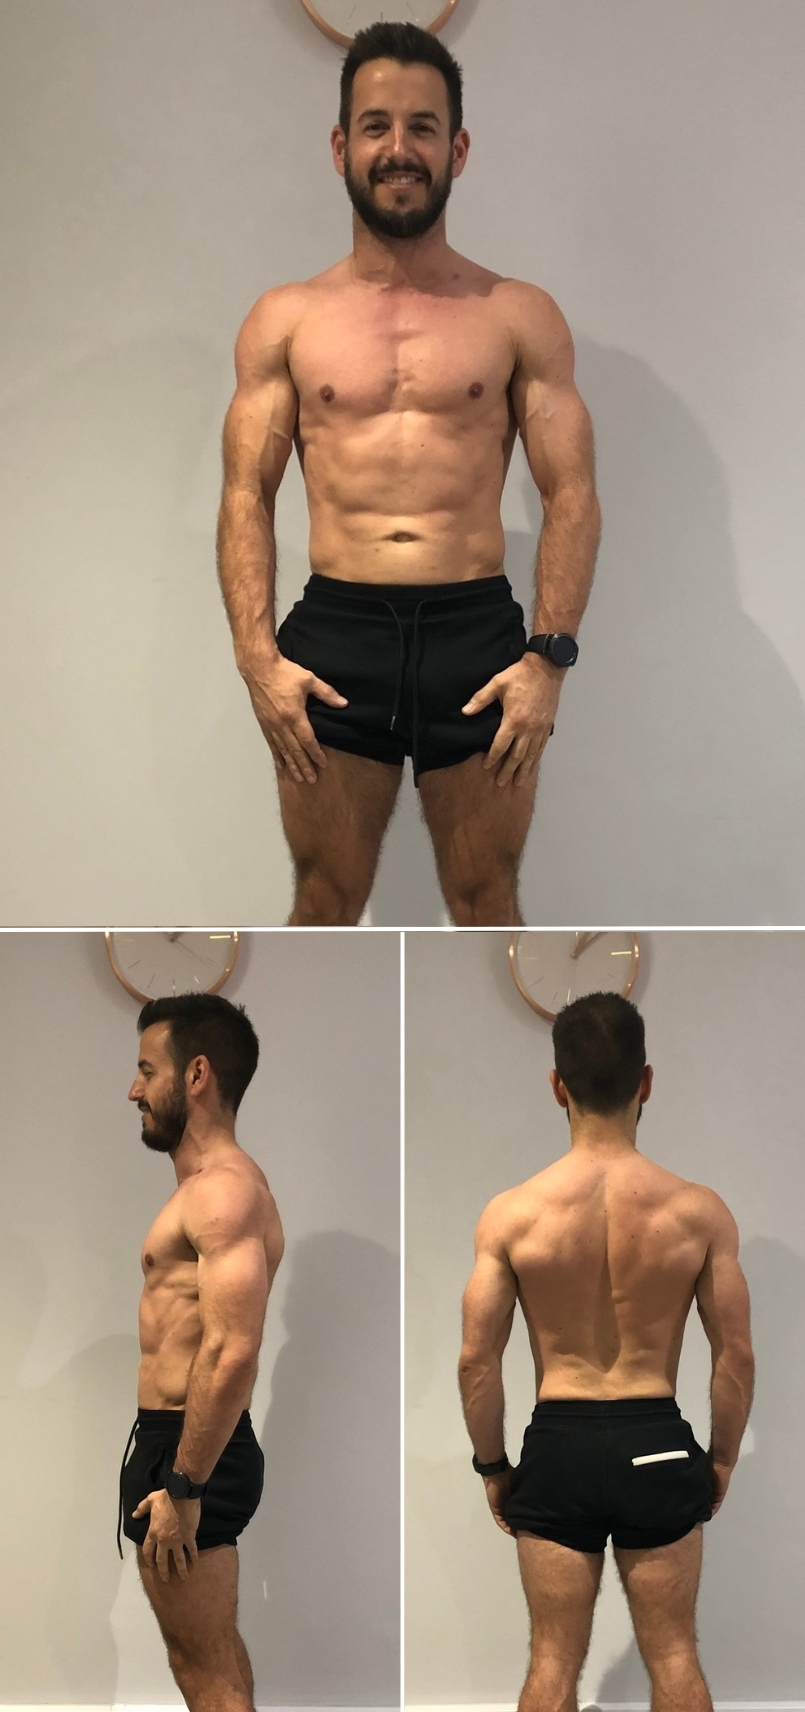 James's after personal training transformation pictures